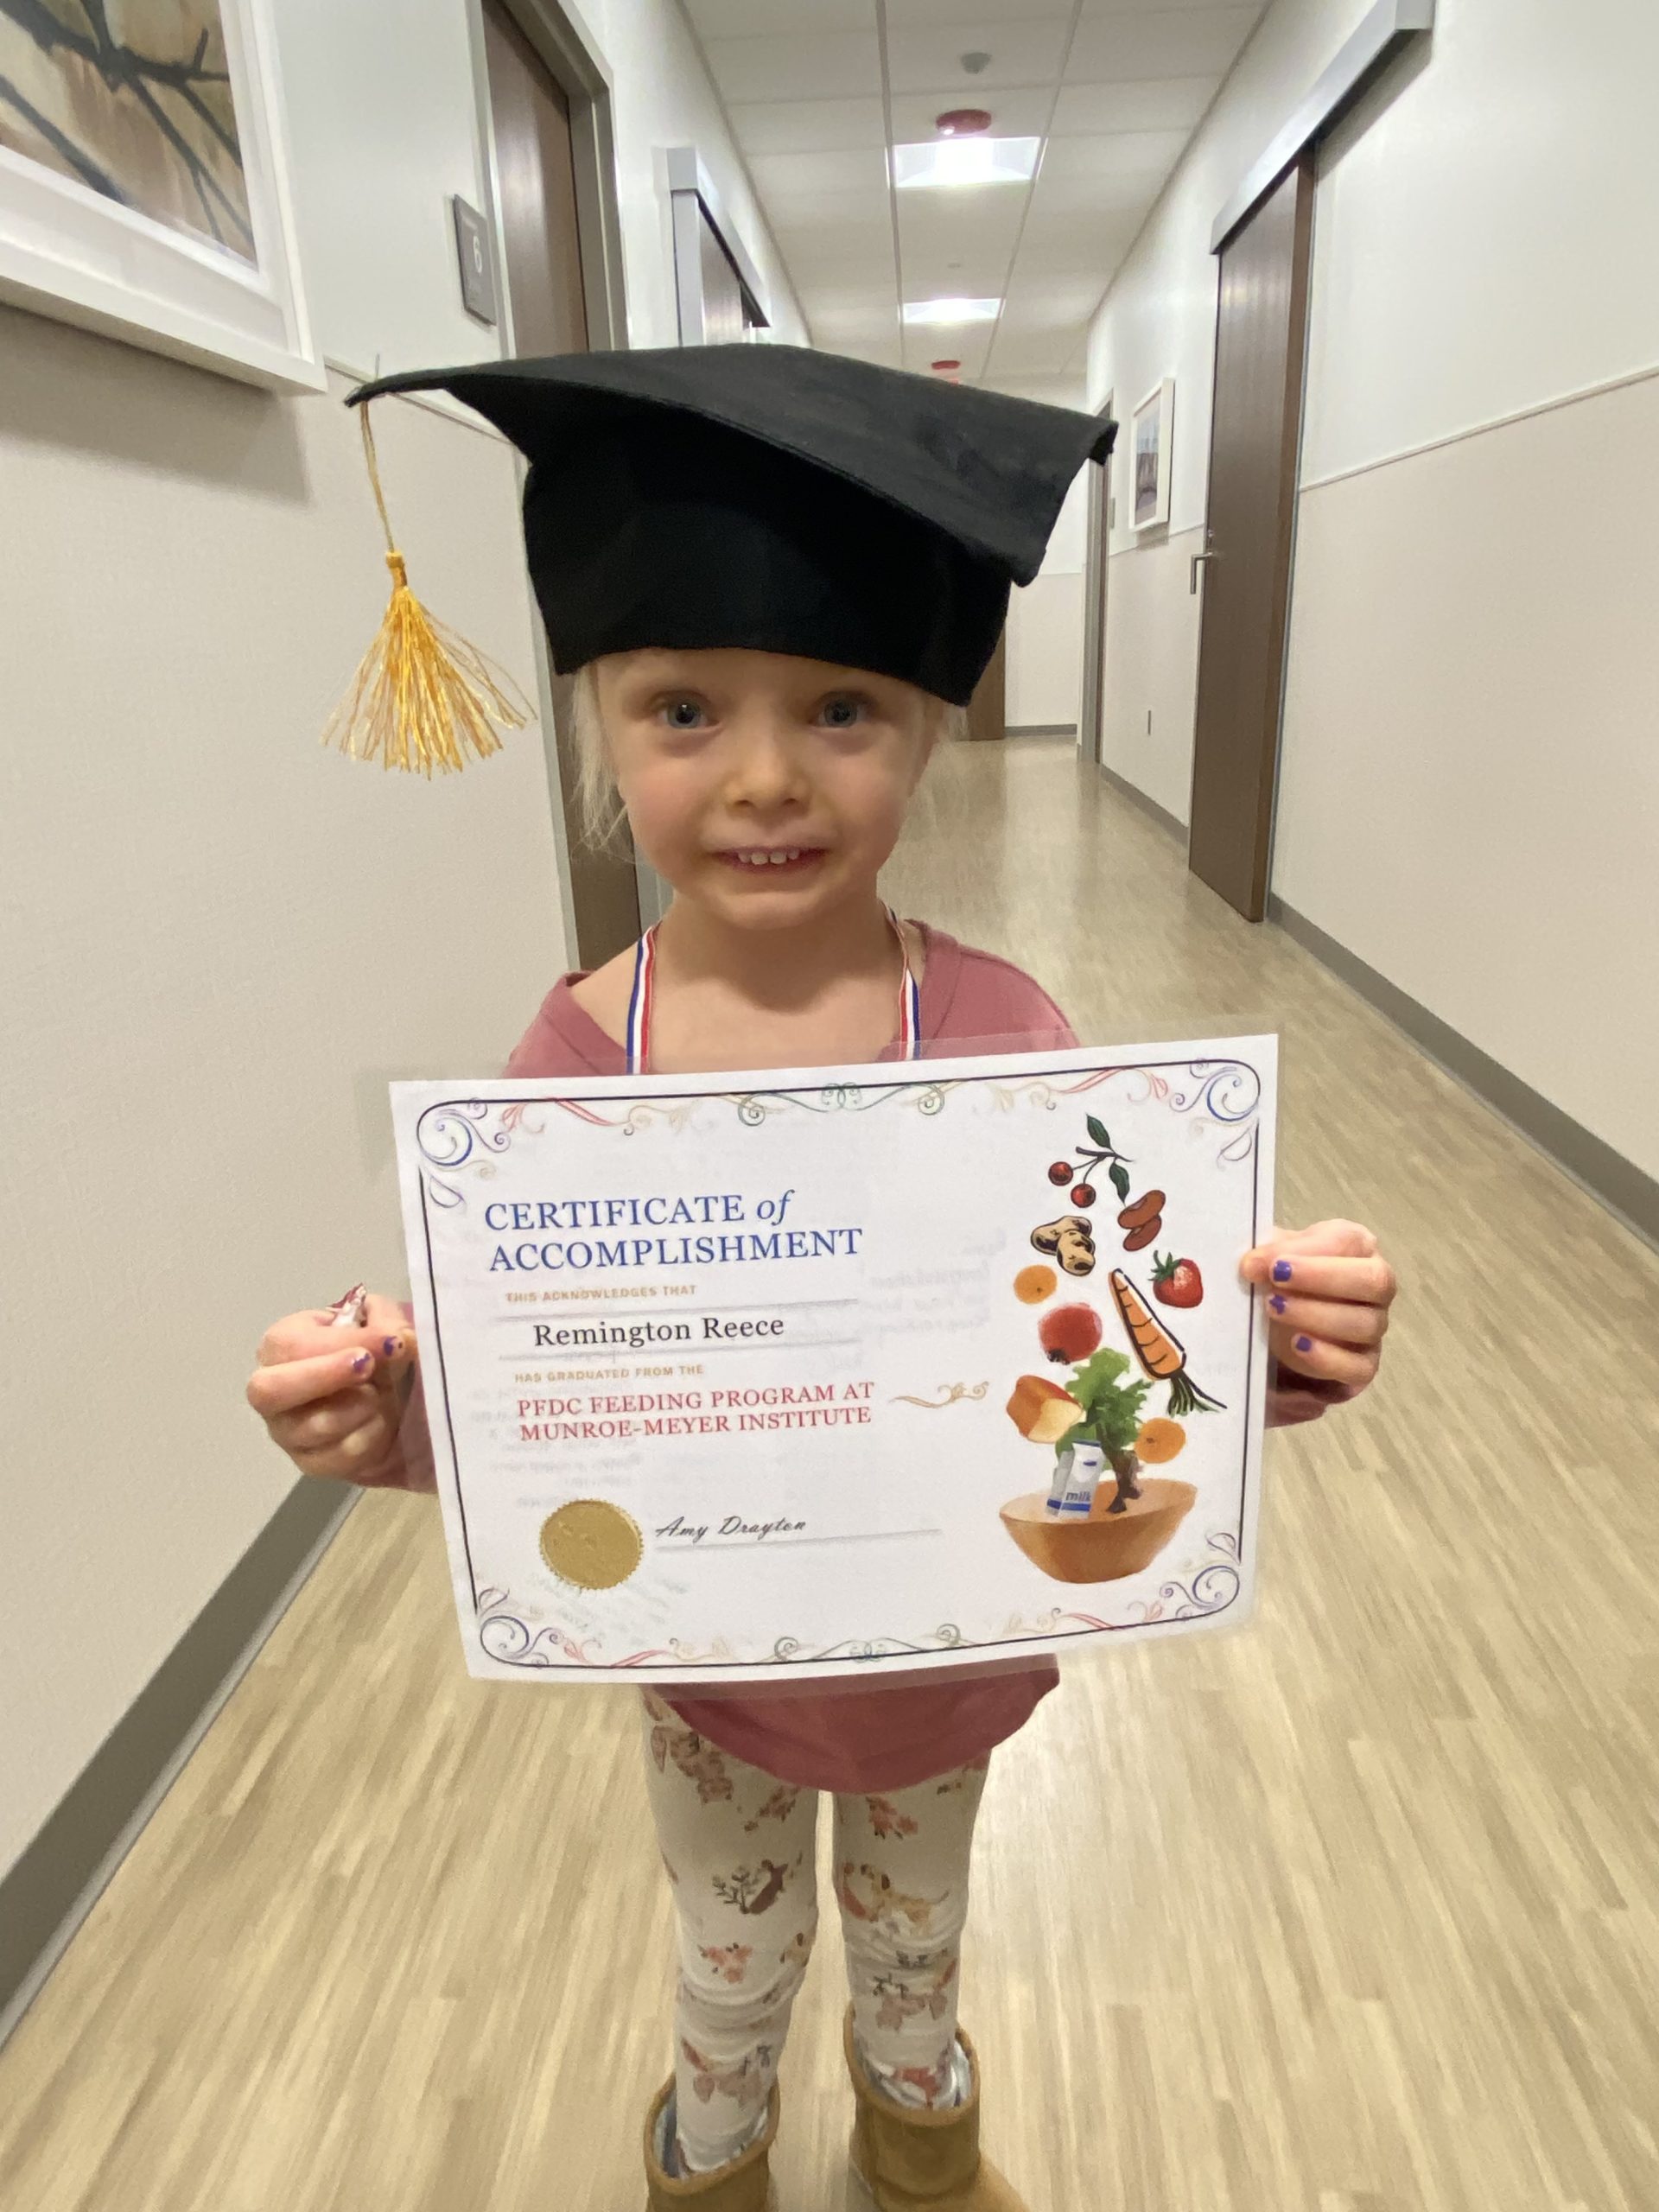 Remi stands holding her graduation certificate while wearing a graduation cap and a big smile